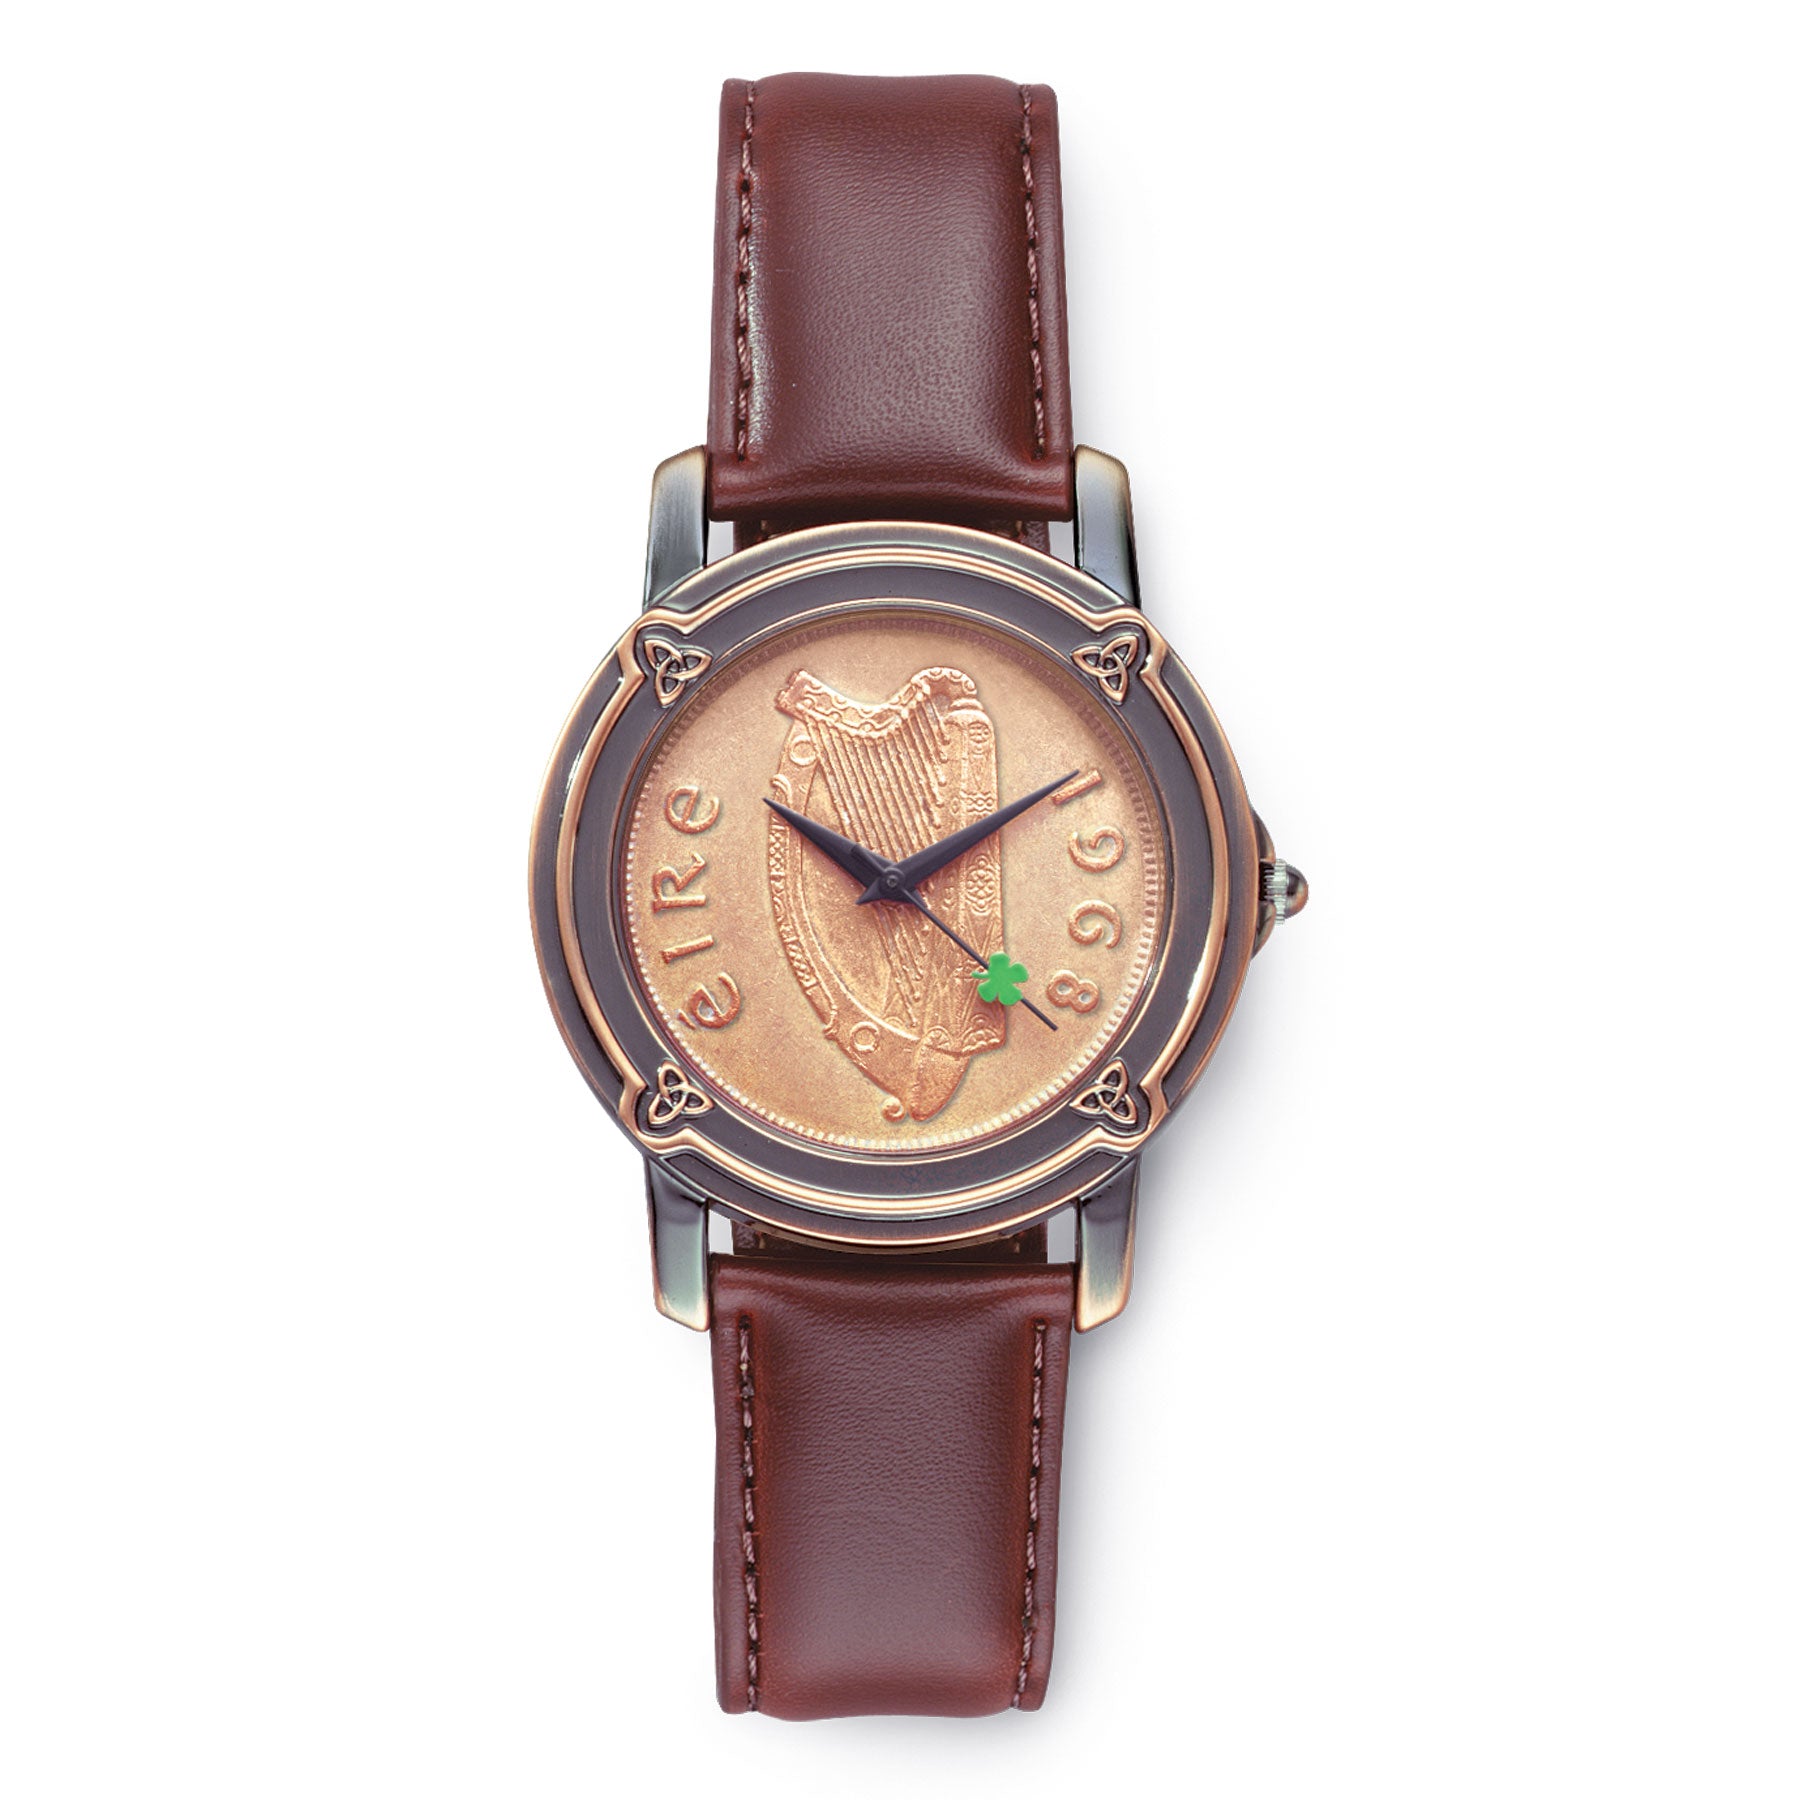 Watch Made from an Irish Penny for Good Luck – Creative Irish Gifts